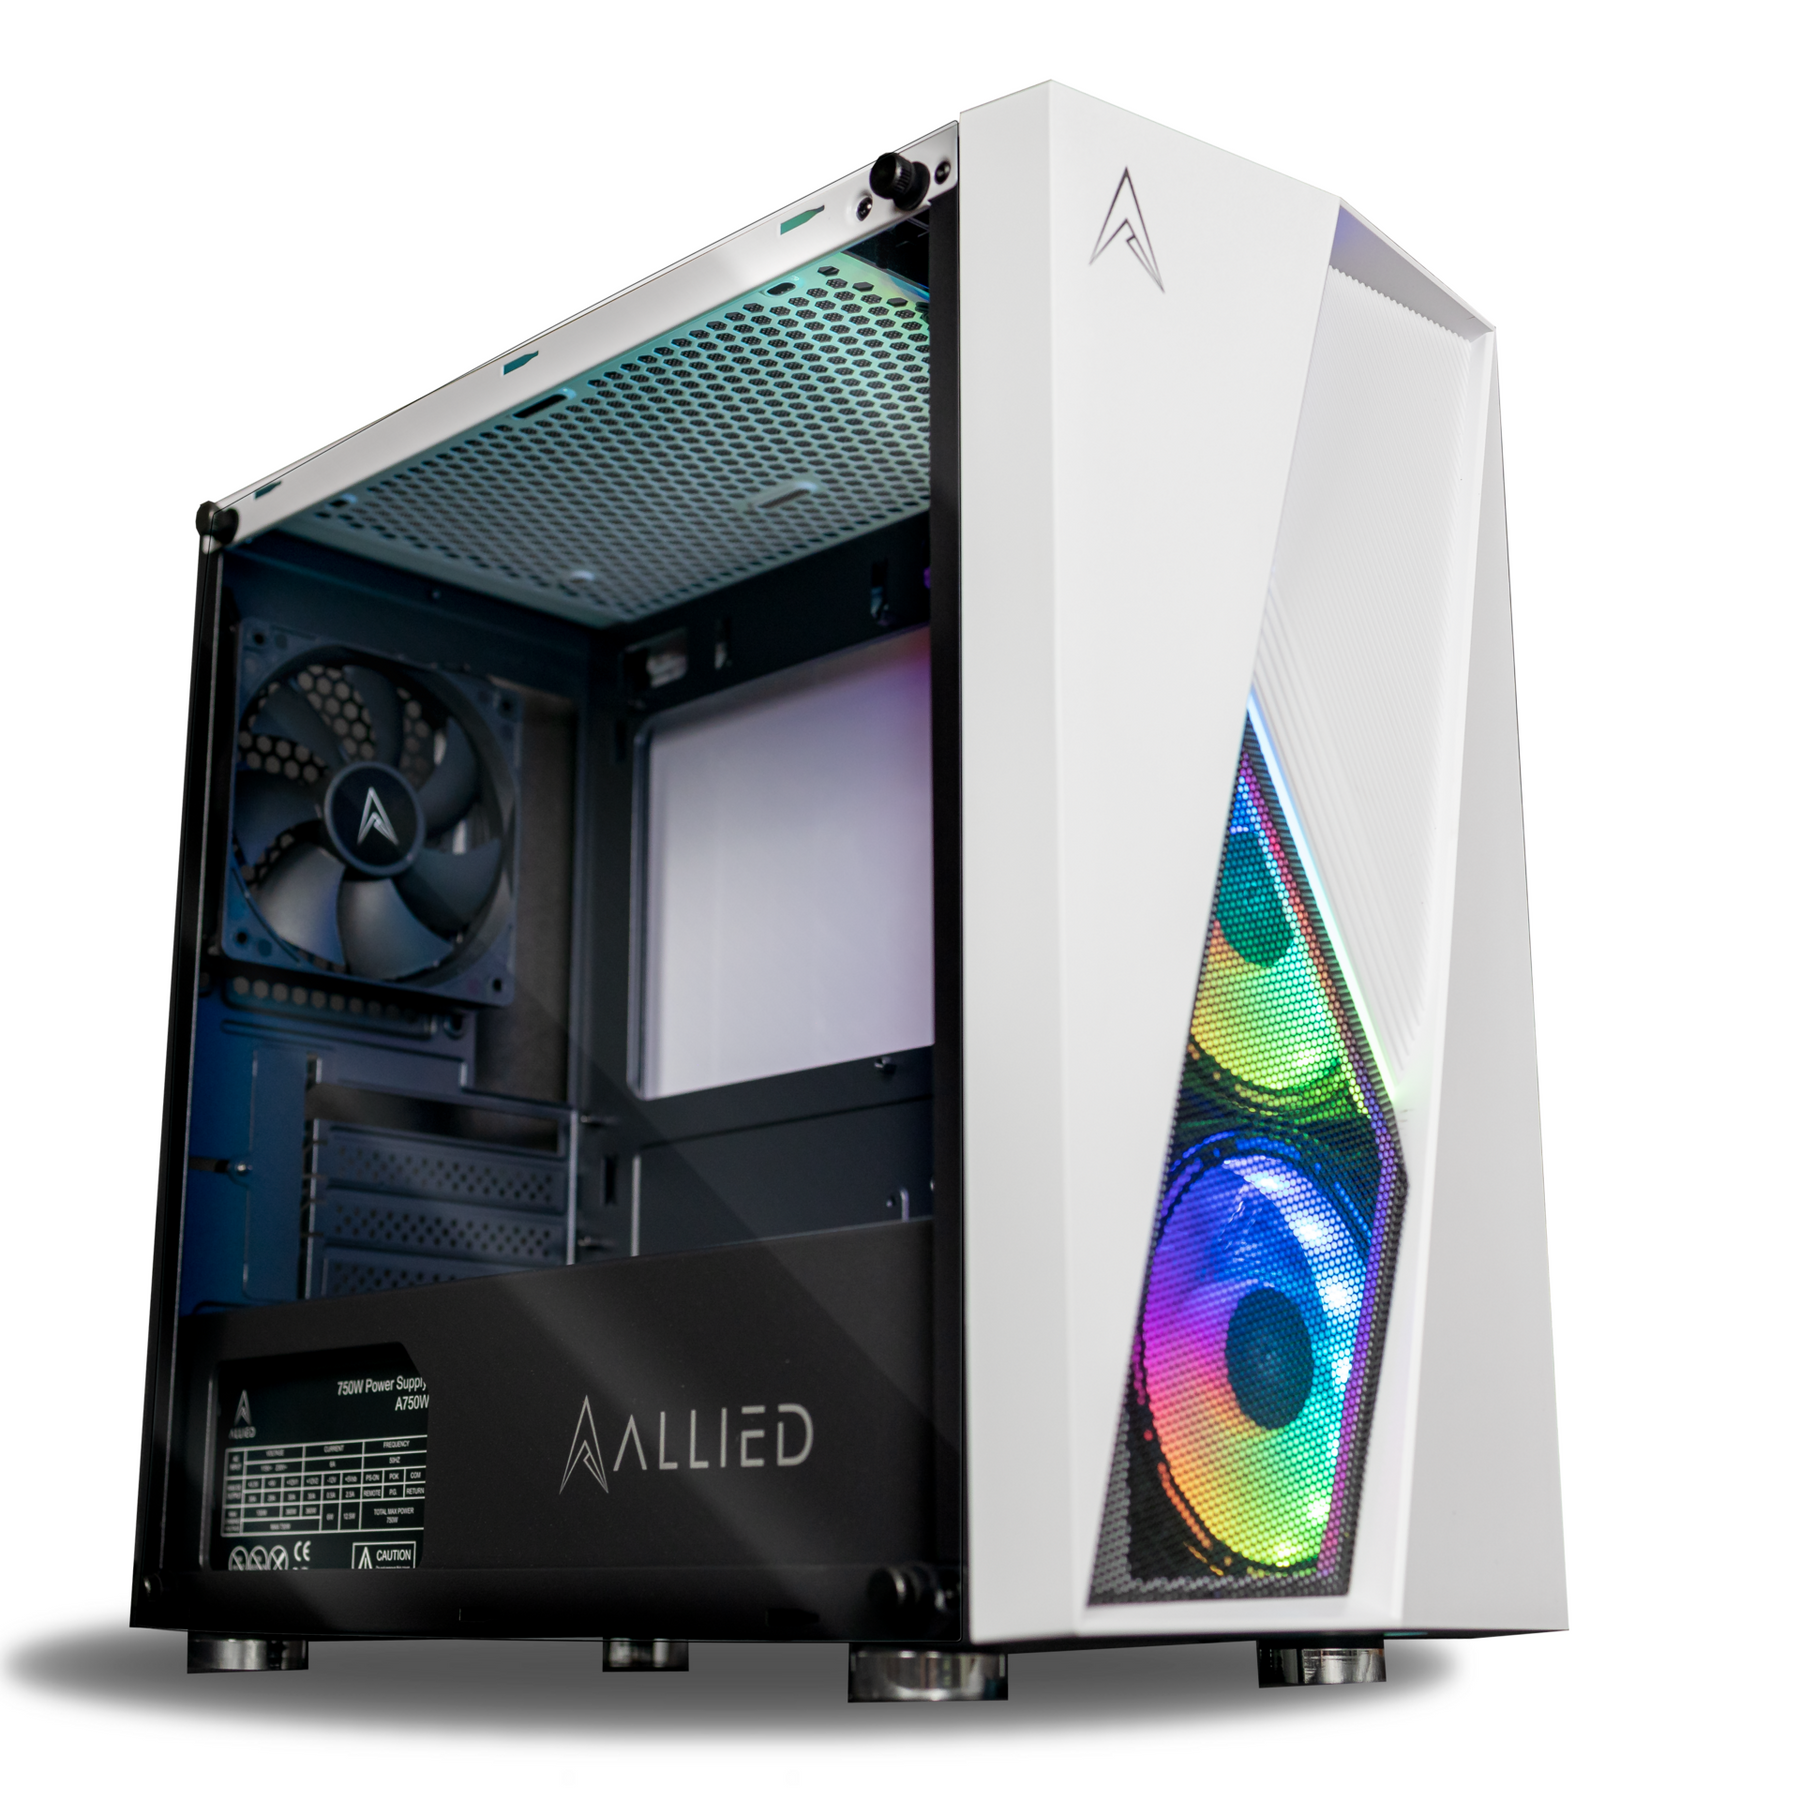 Allied Stinger Micro-ATX Tower Gaming Desktop Case